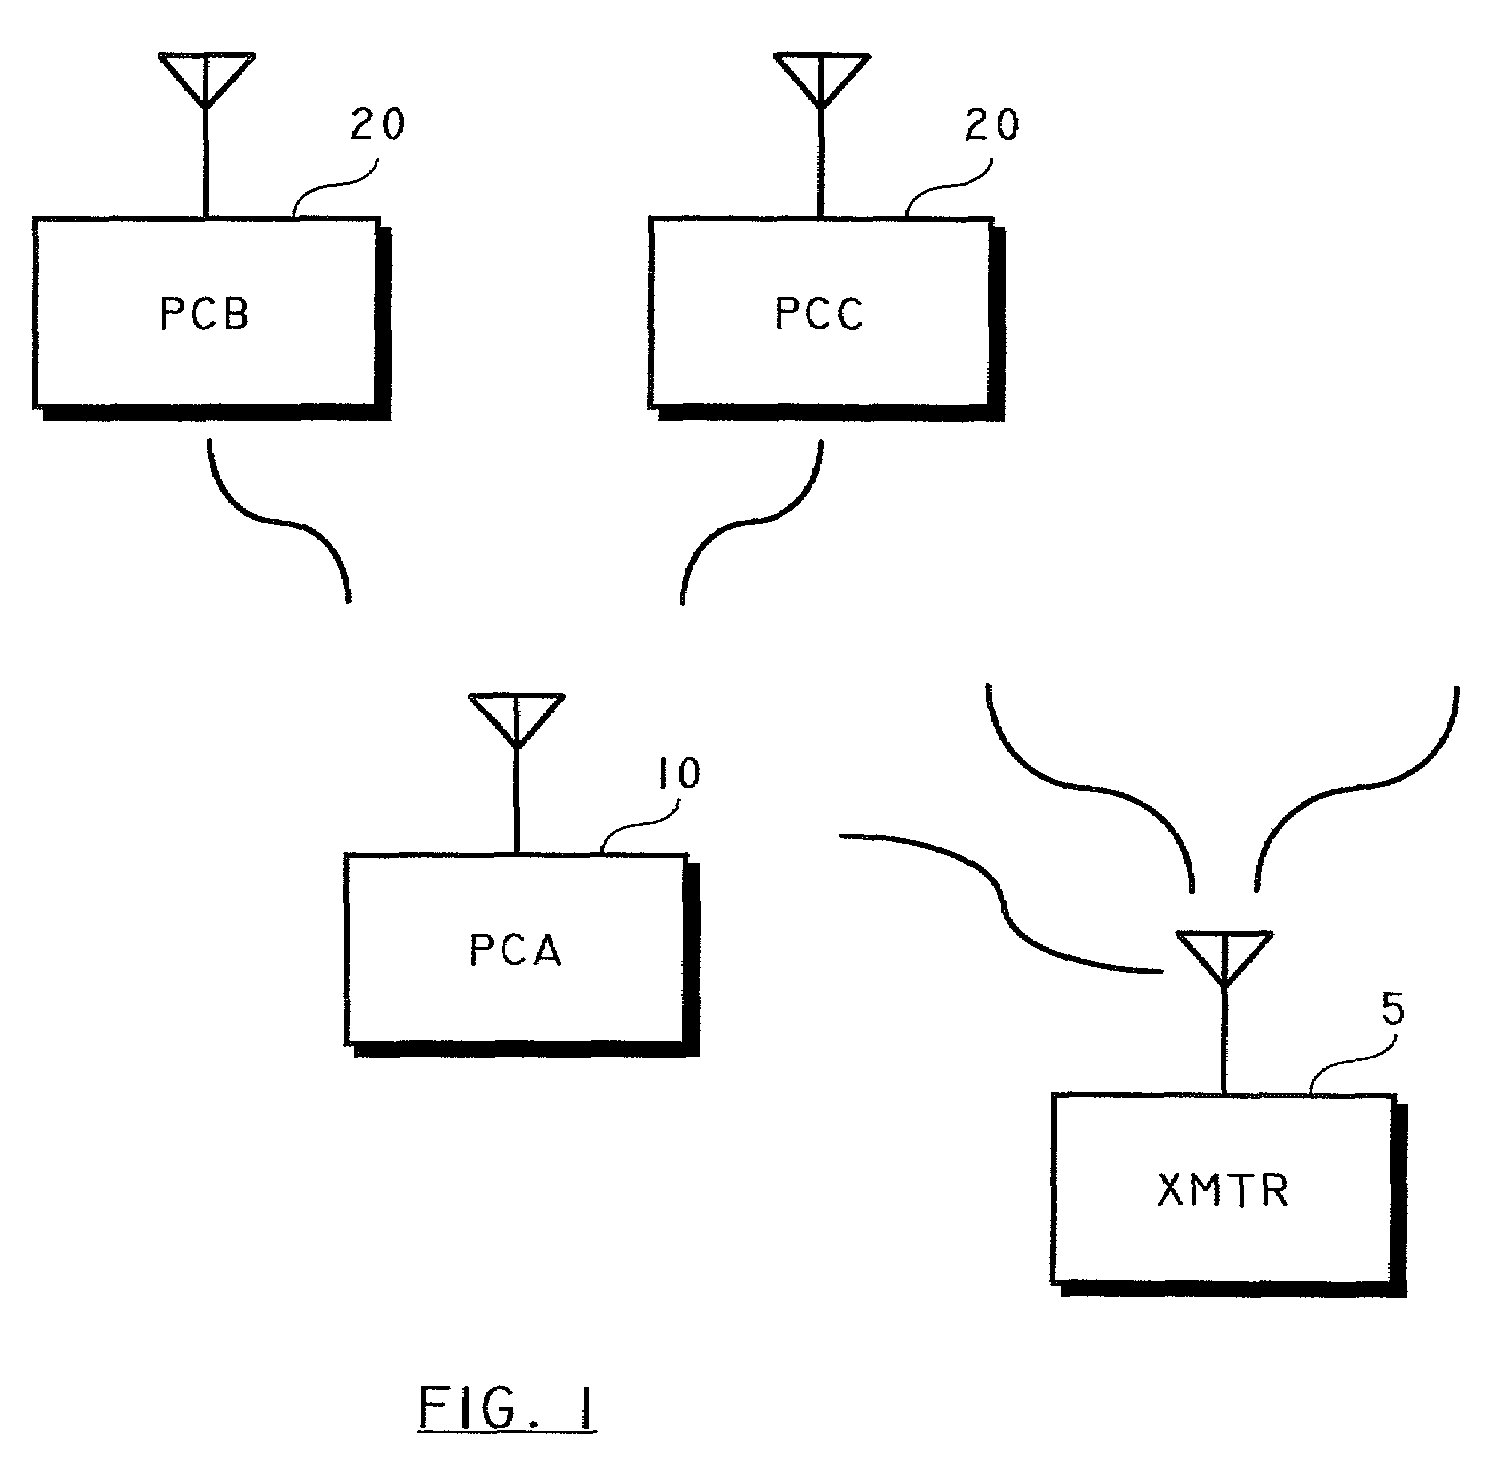 Method of synchronizing the playback of a digital audio broadcast by inserting a control track pulse